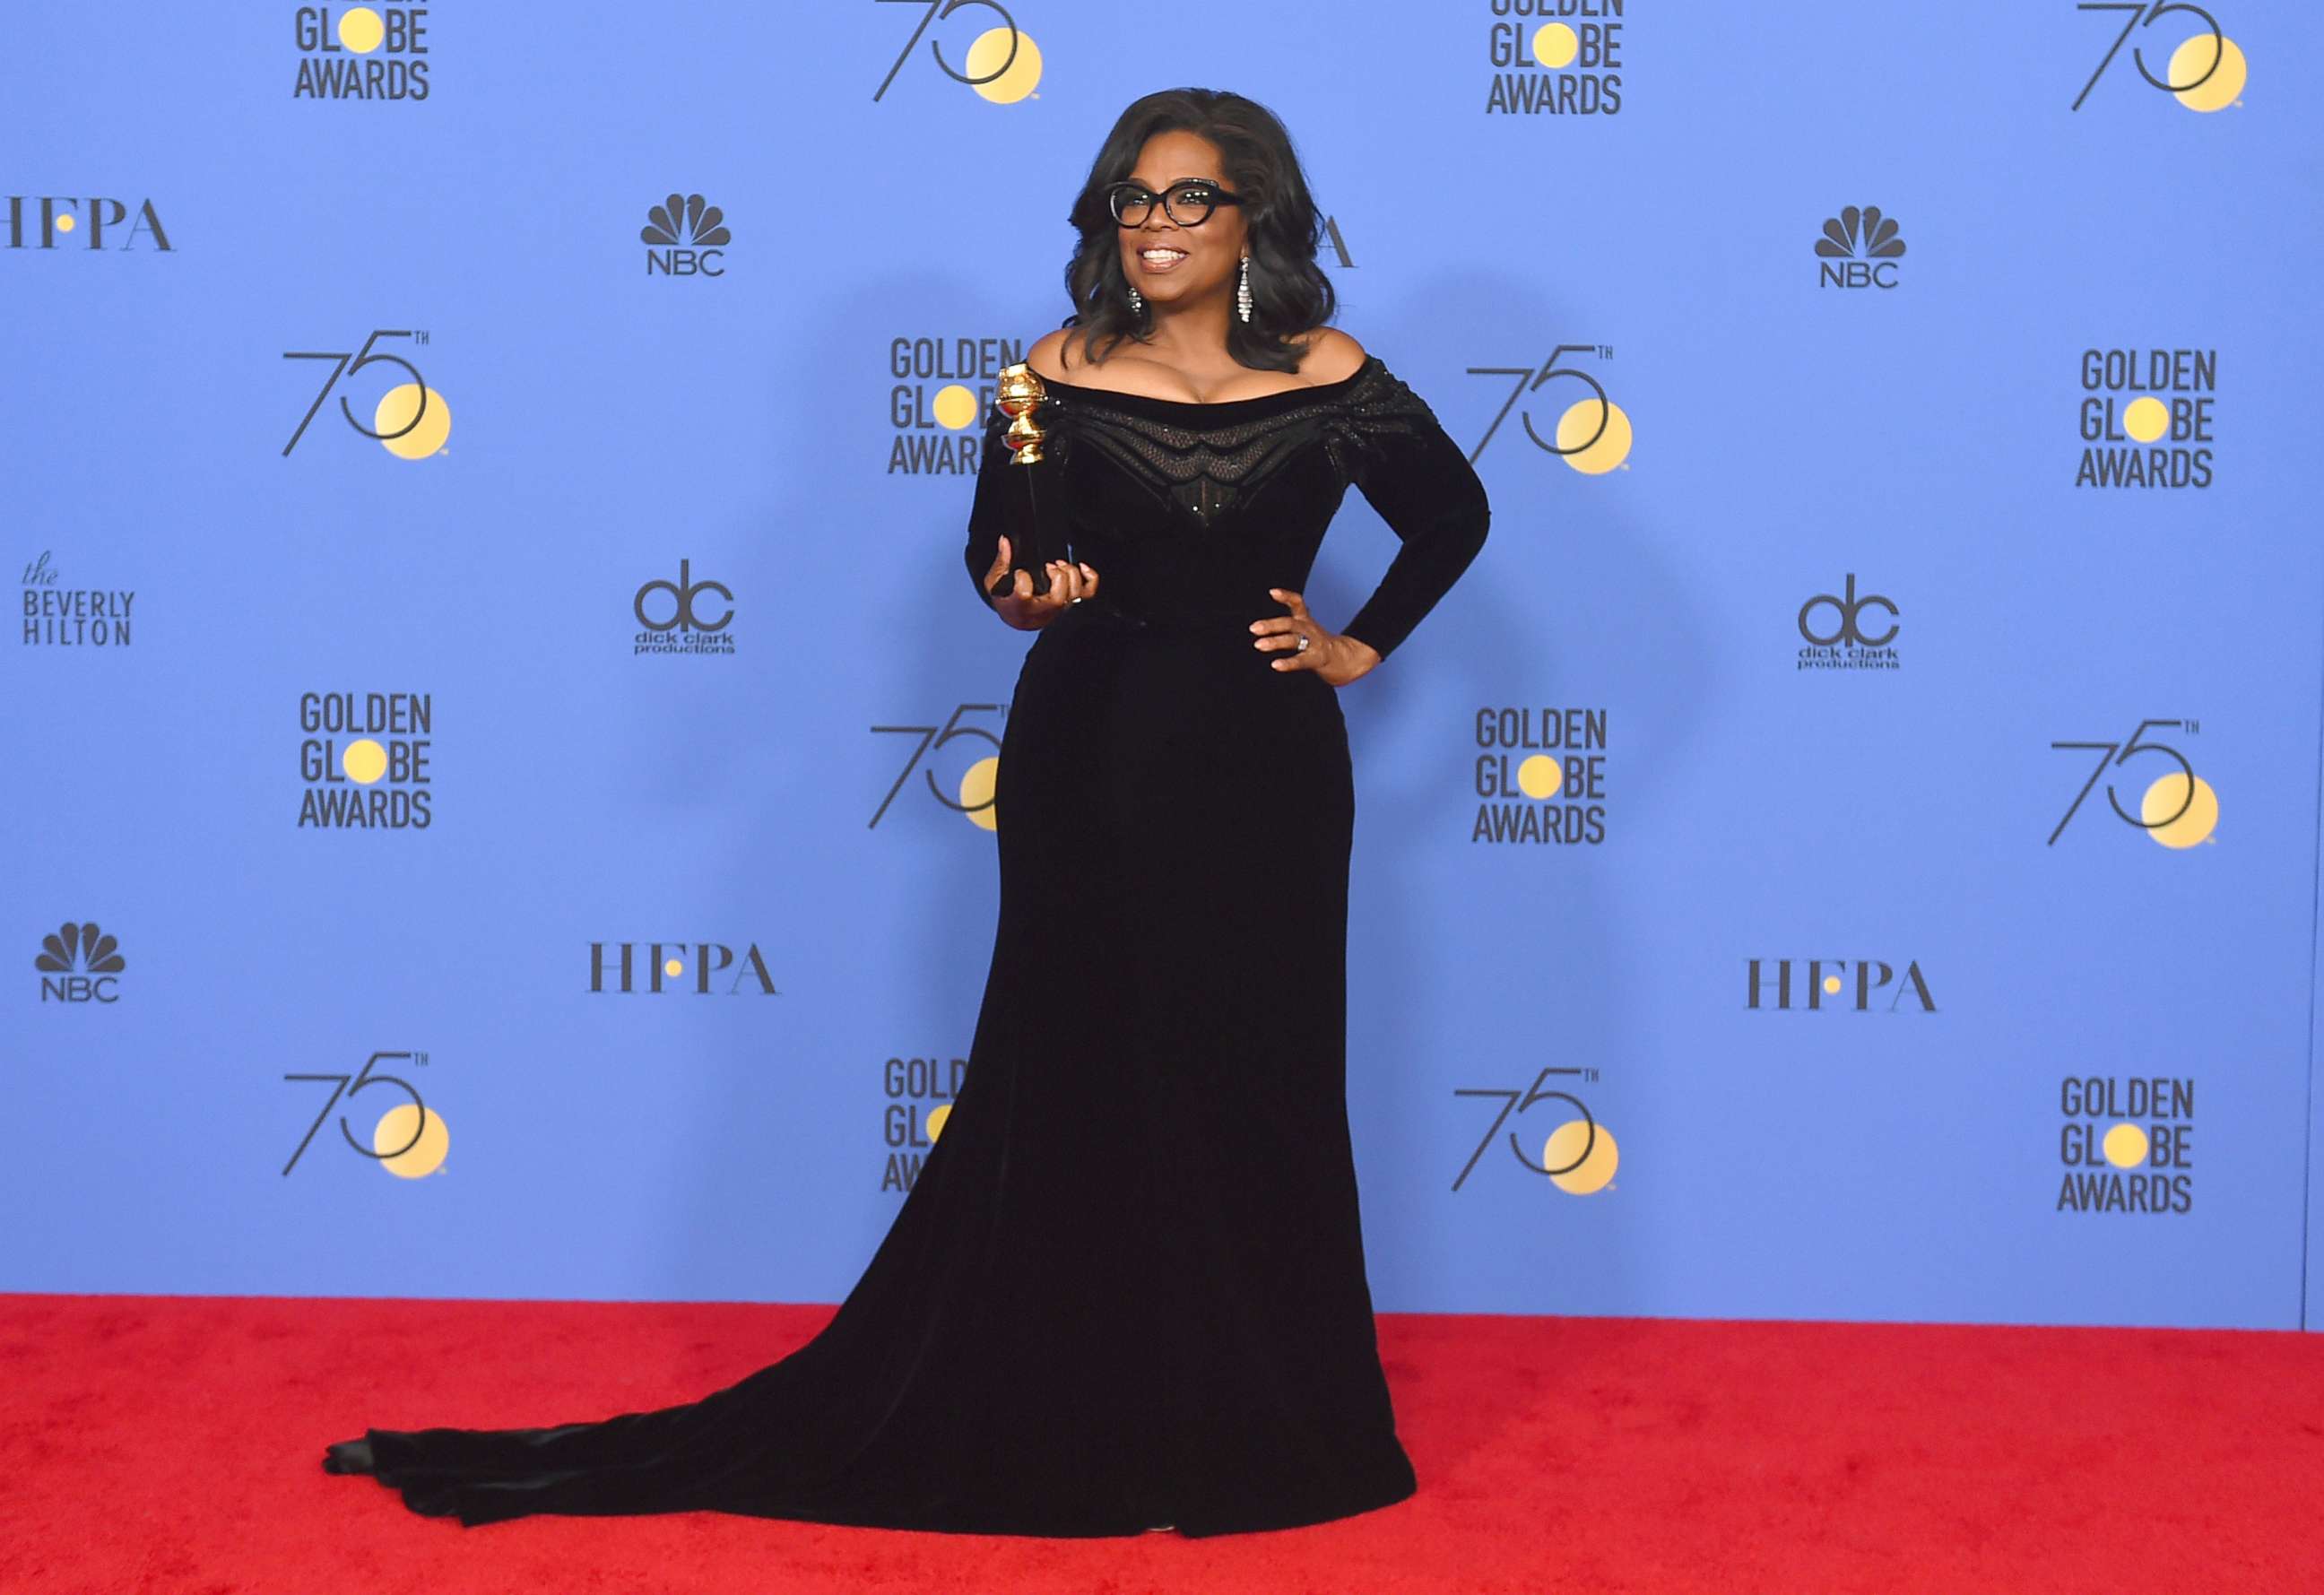 PHOTO: Oprah Winfrey poses in the press room with the Cecil B. DeMille Award at the 75th annual Golden Globe Awards at the Beverly Hilton Hotel, Jan. 7, 2018, in Beverly Hills, Calif.